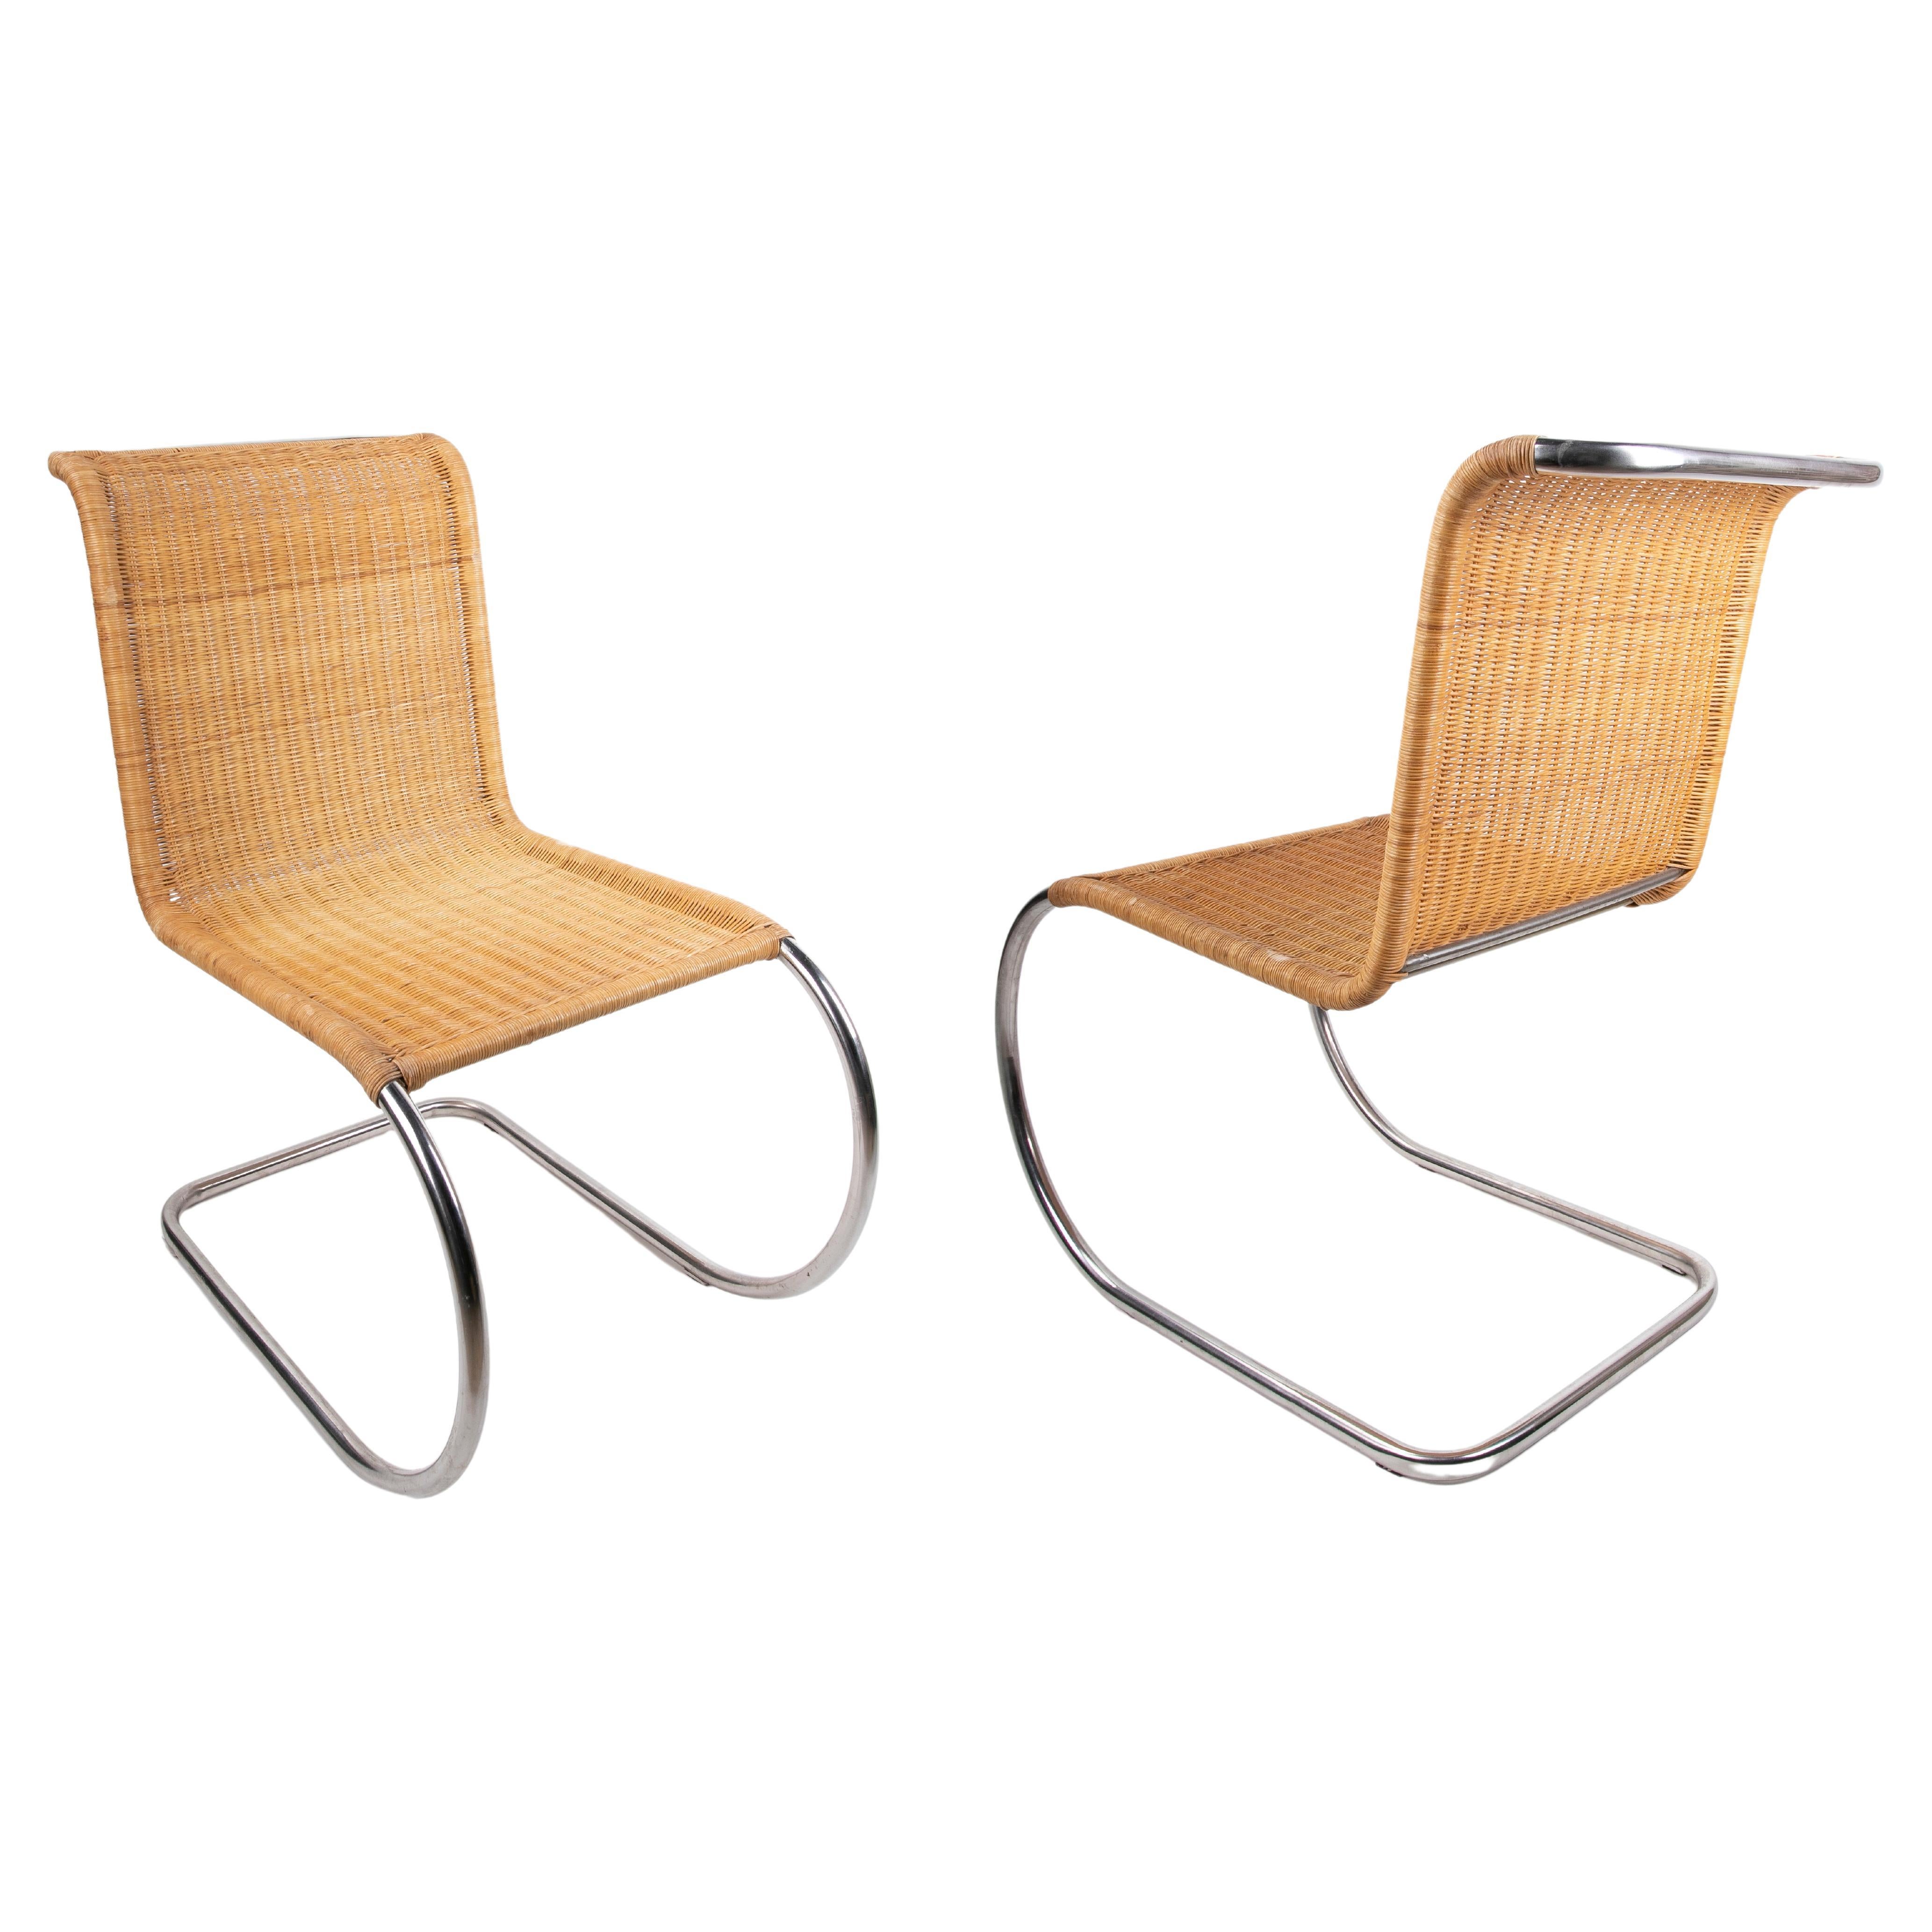 1950s Italian Early Mies Van Der Rohe "MR 10" Chair in Wicker and Chrome Steel